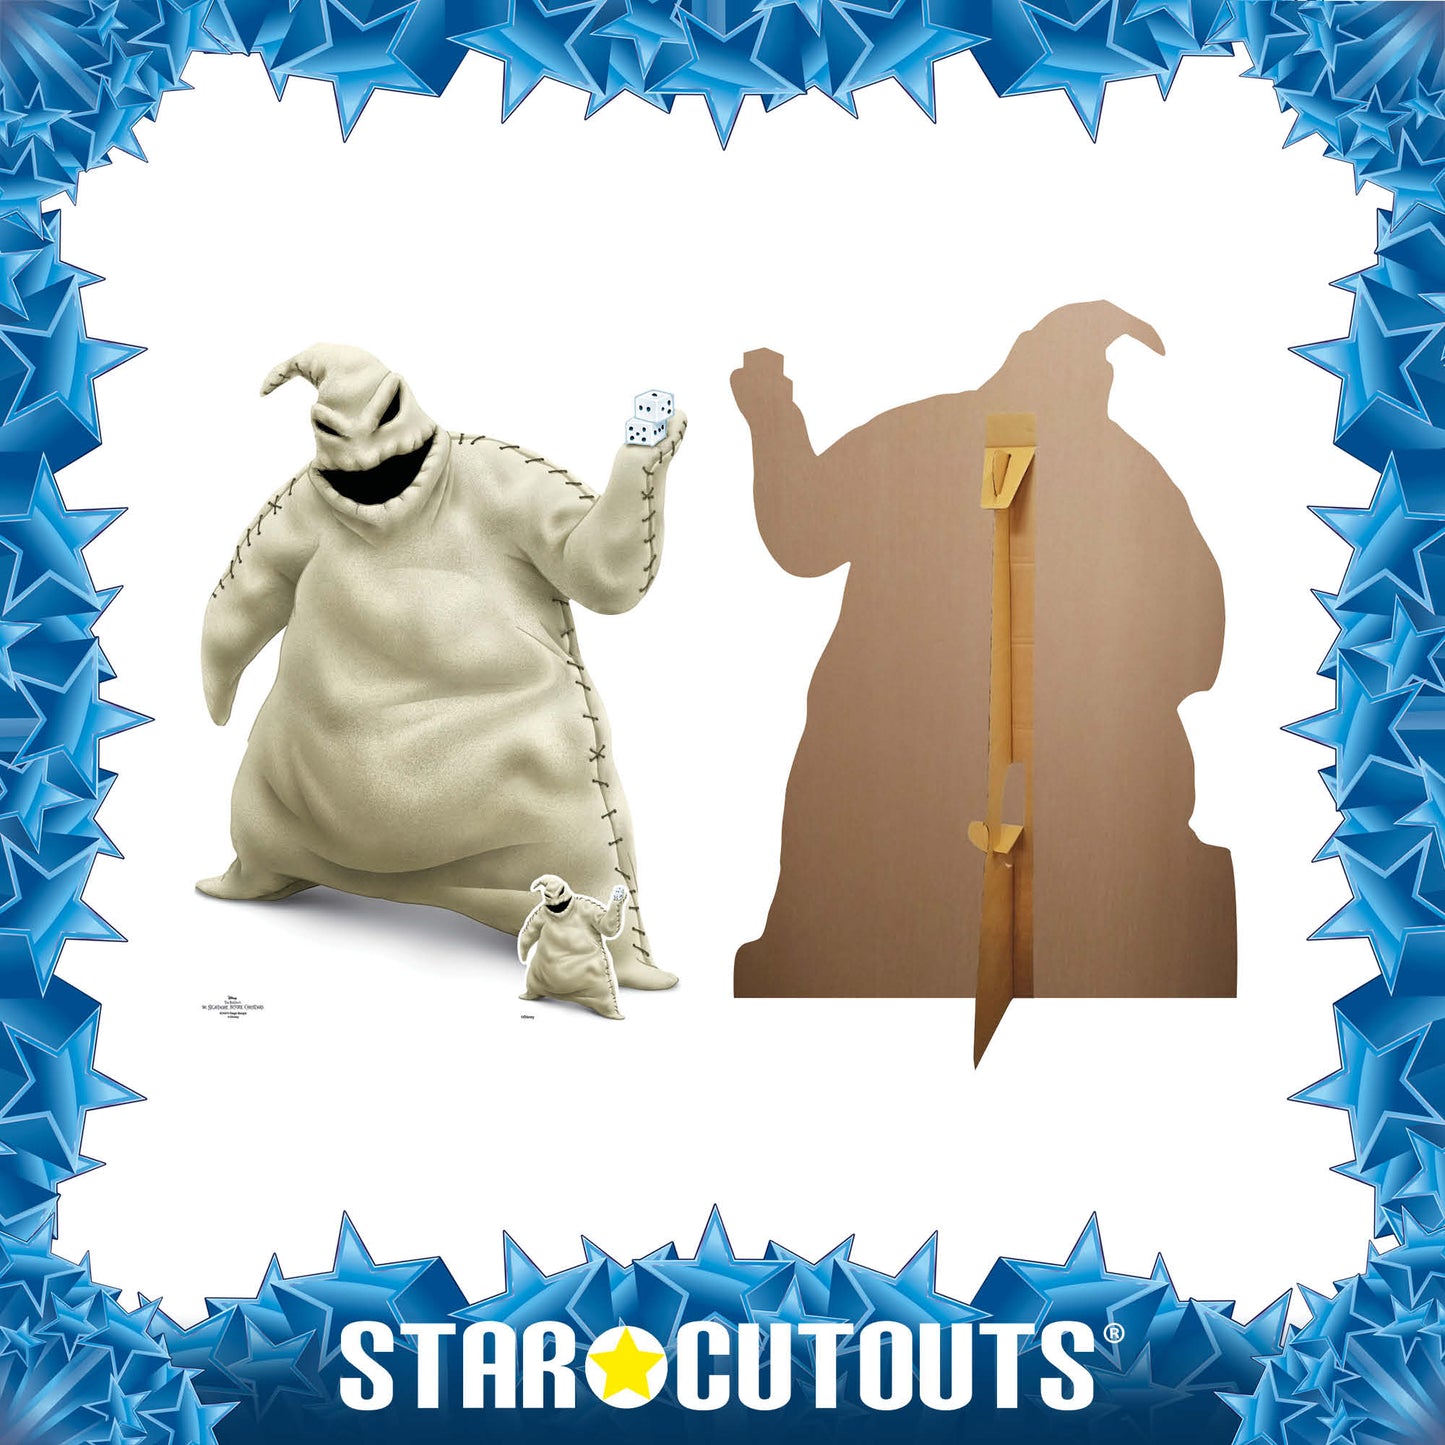 SC4373 Oogie Boogie Nightmare Before Christmas Cardboard Cut Out Height 130cm